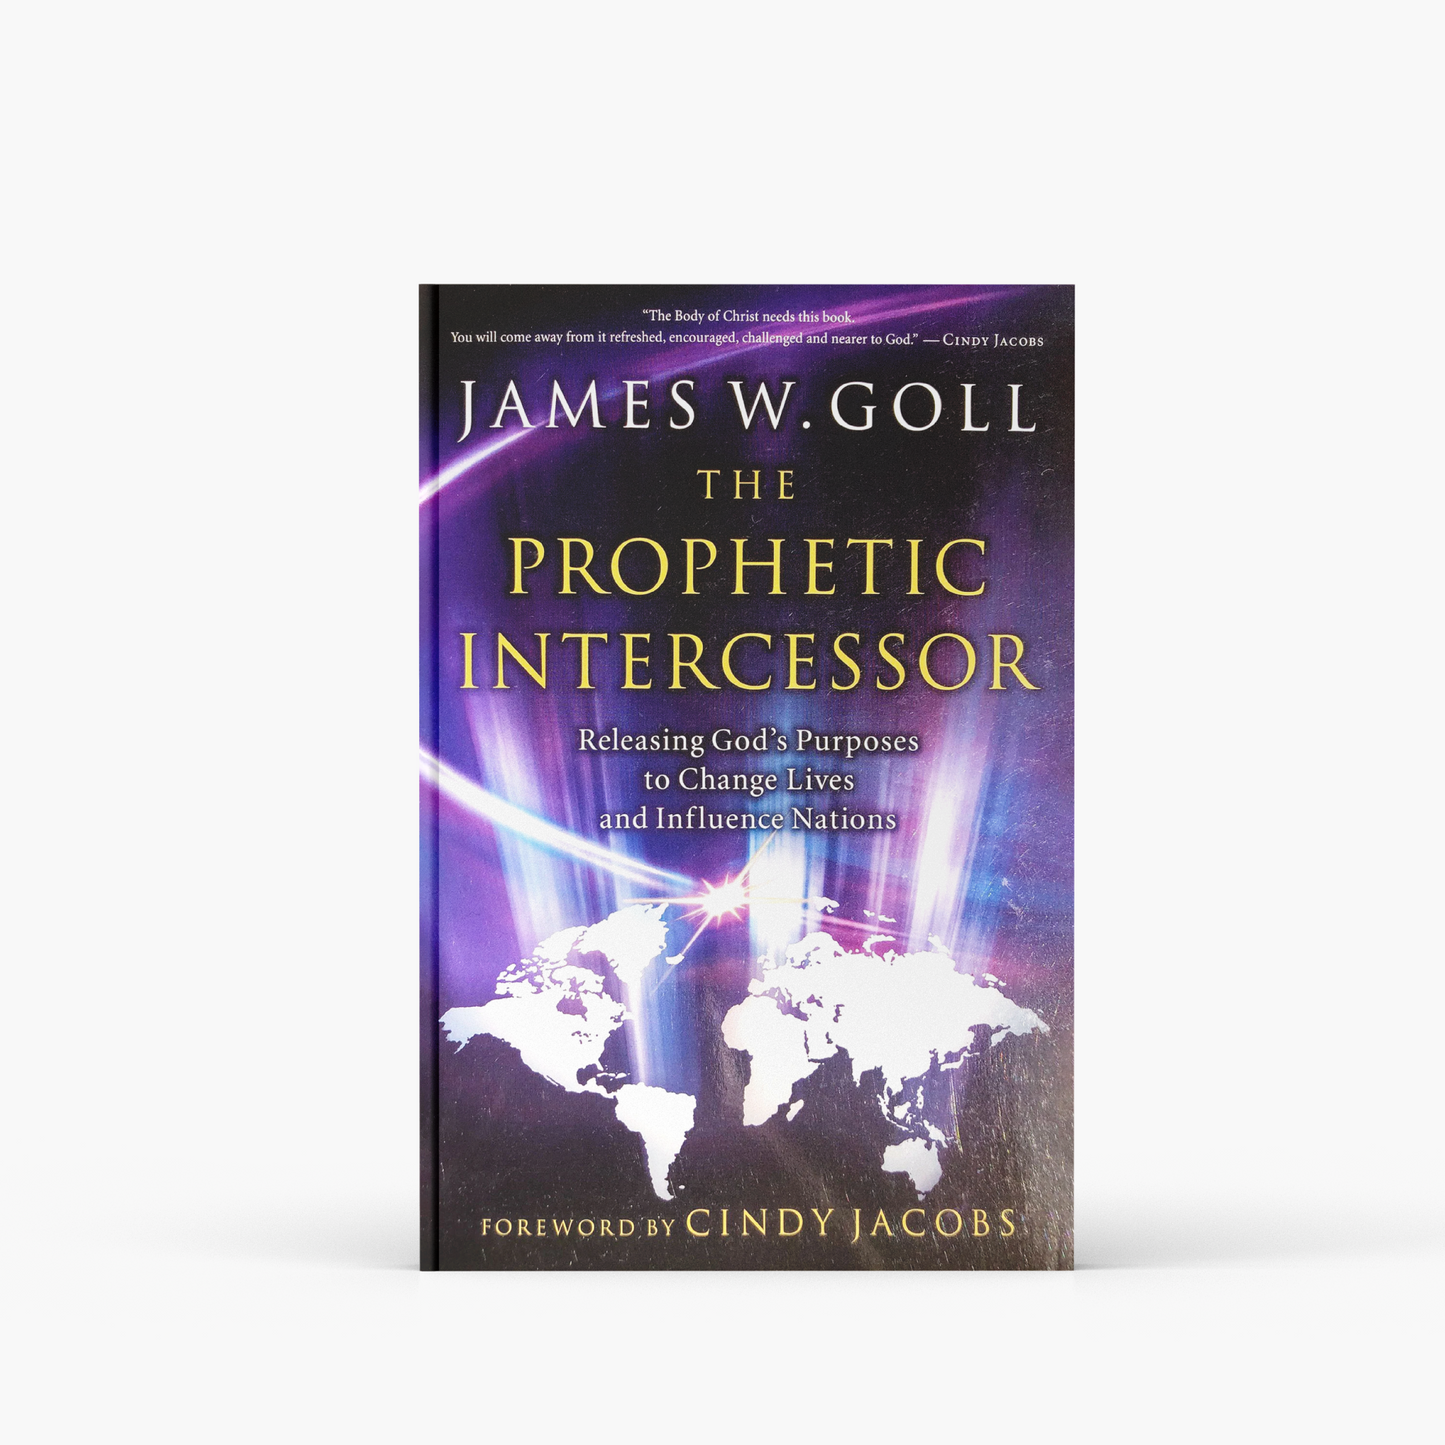 The Prophetic Intercessor: Releasing God's Purposes to Change Lives and Influence Nations